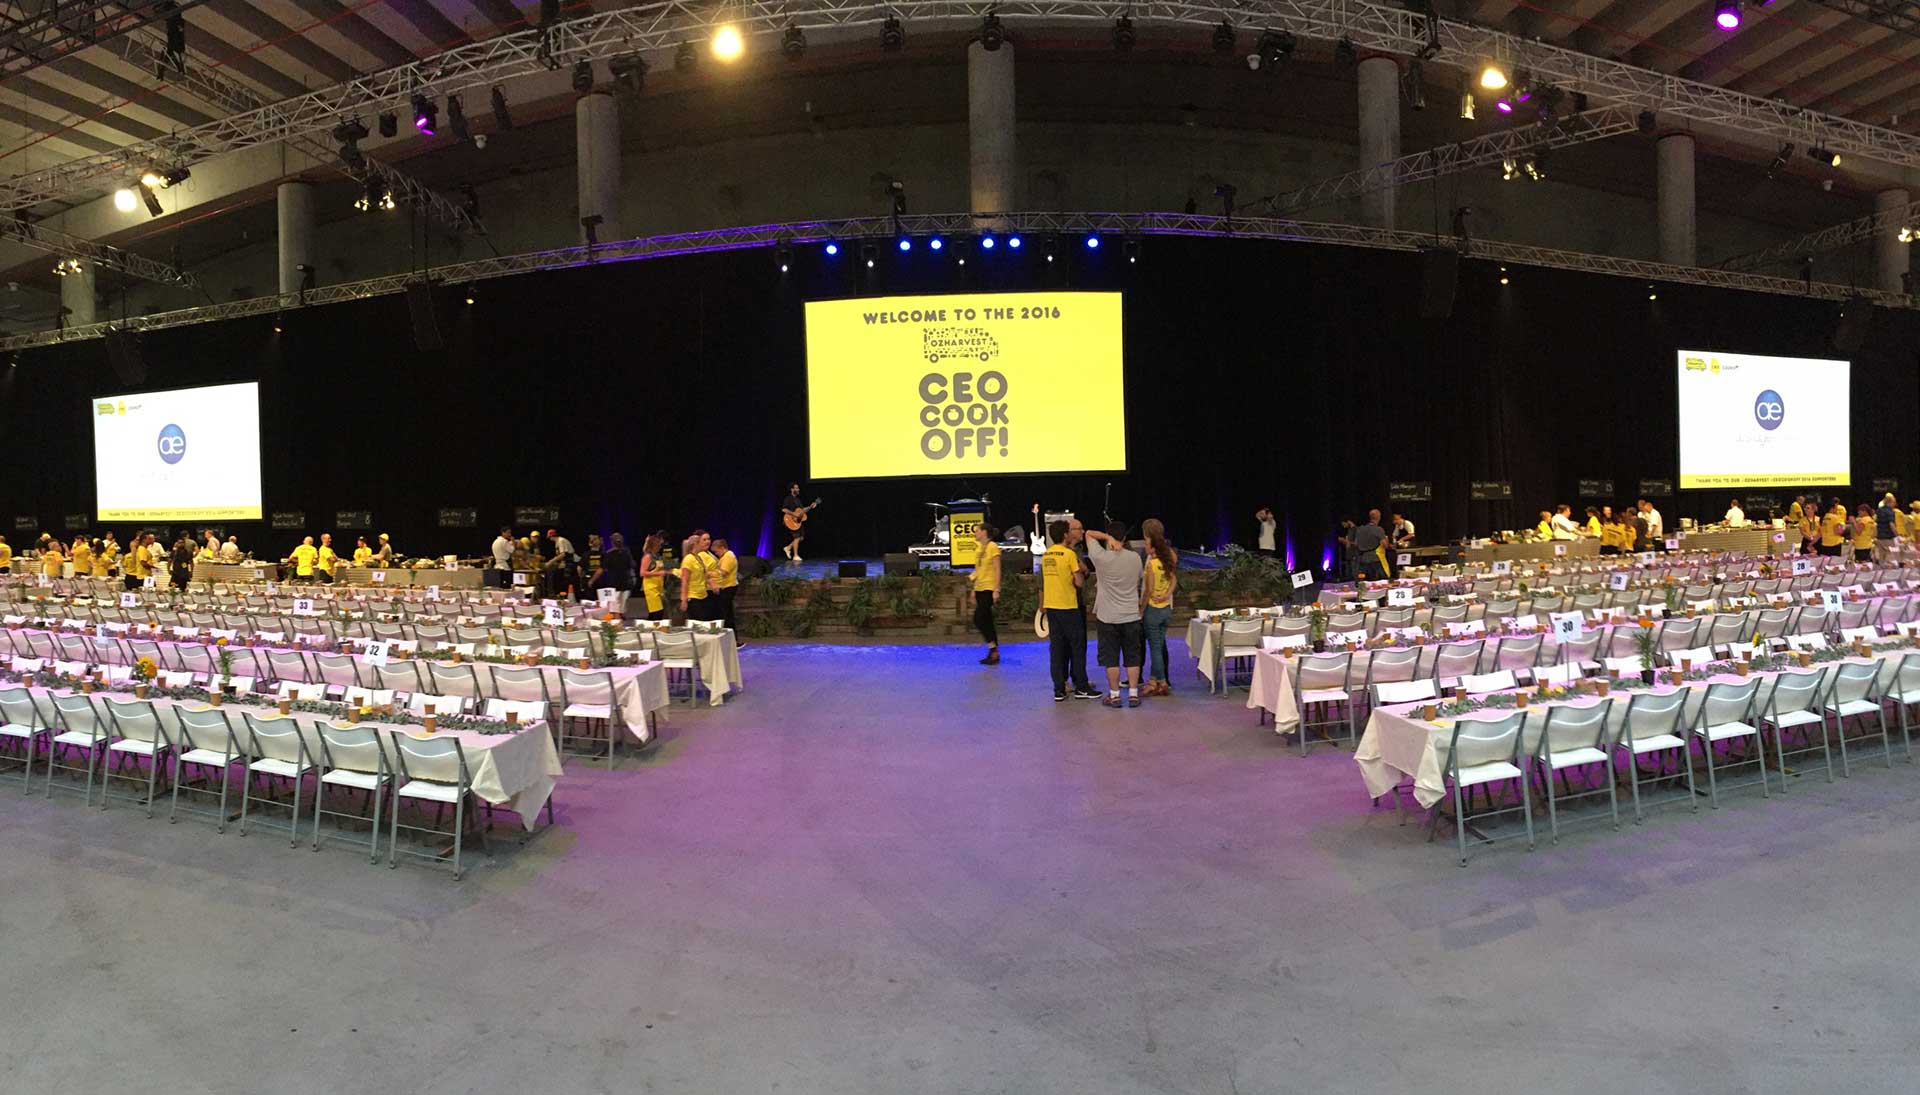 OzHarvest CEO CookOff 2016